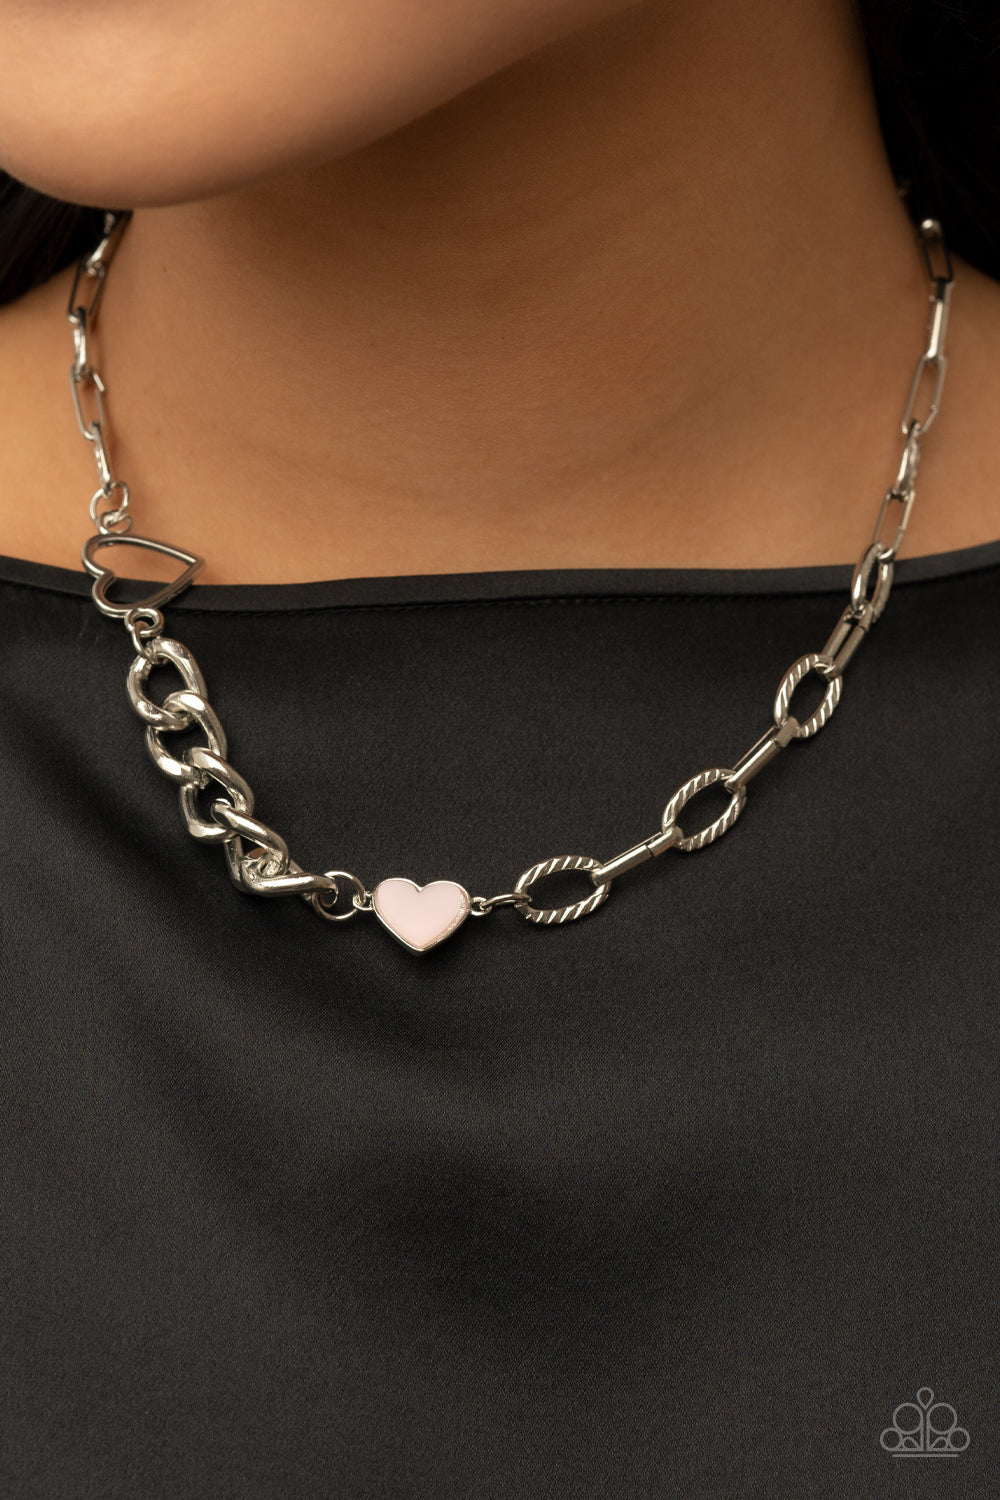 Little Charmer - Pink Heart and Silver Necklace - Paparazzi Accessories - Shiny silver and Pale Rosette hearts asymmetrically adorn sections of mismatched silver chain, resulting in a flirtatious pop of color below the collar.